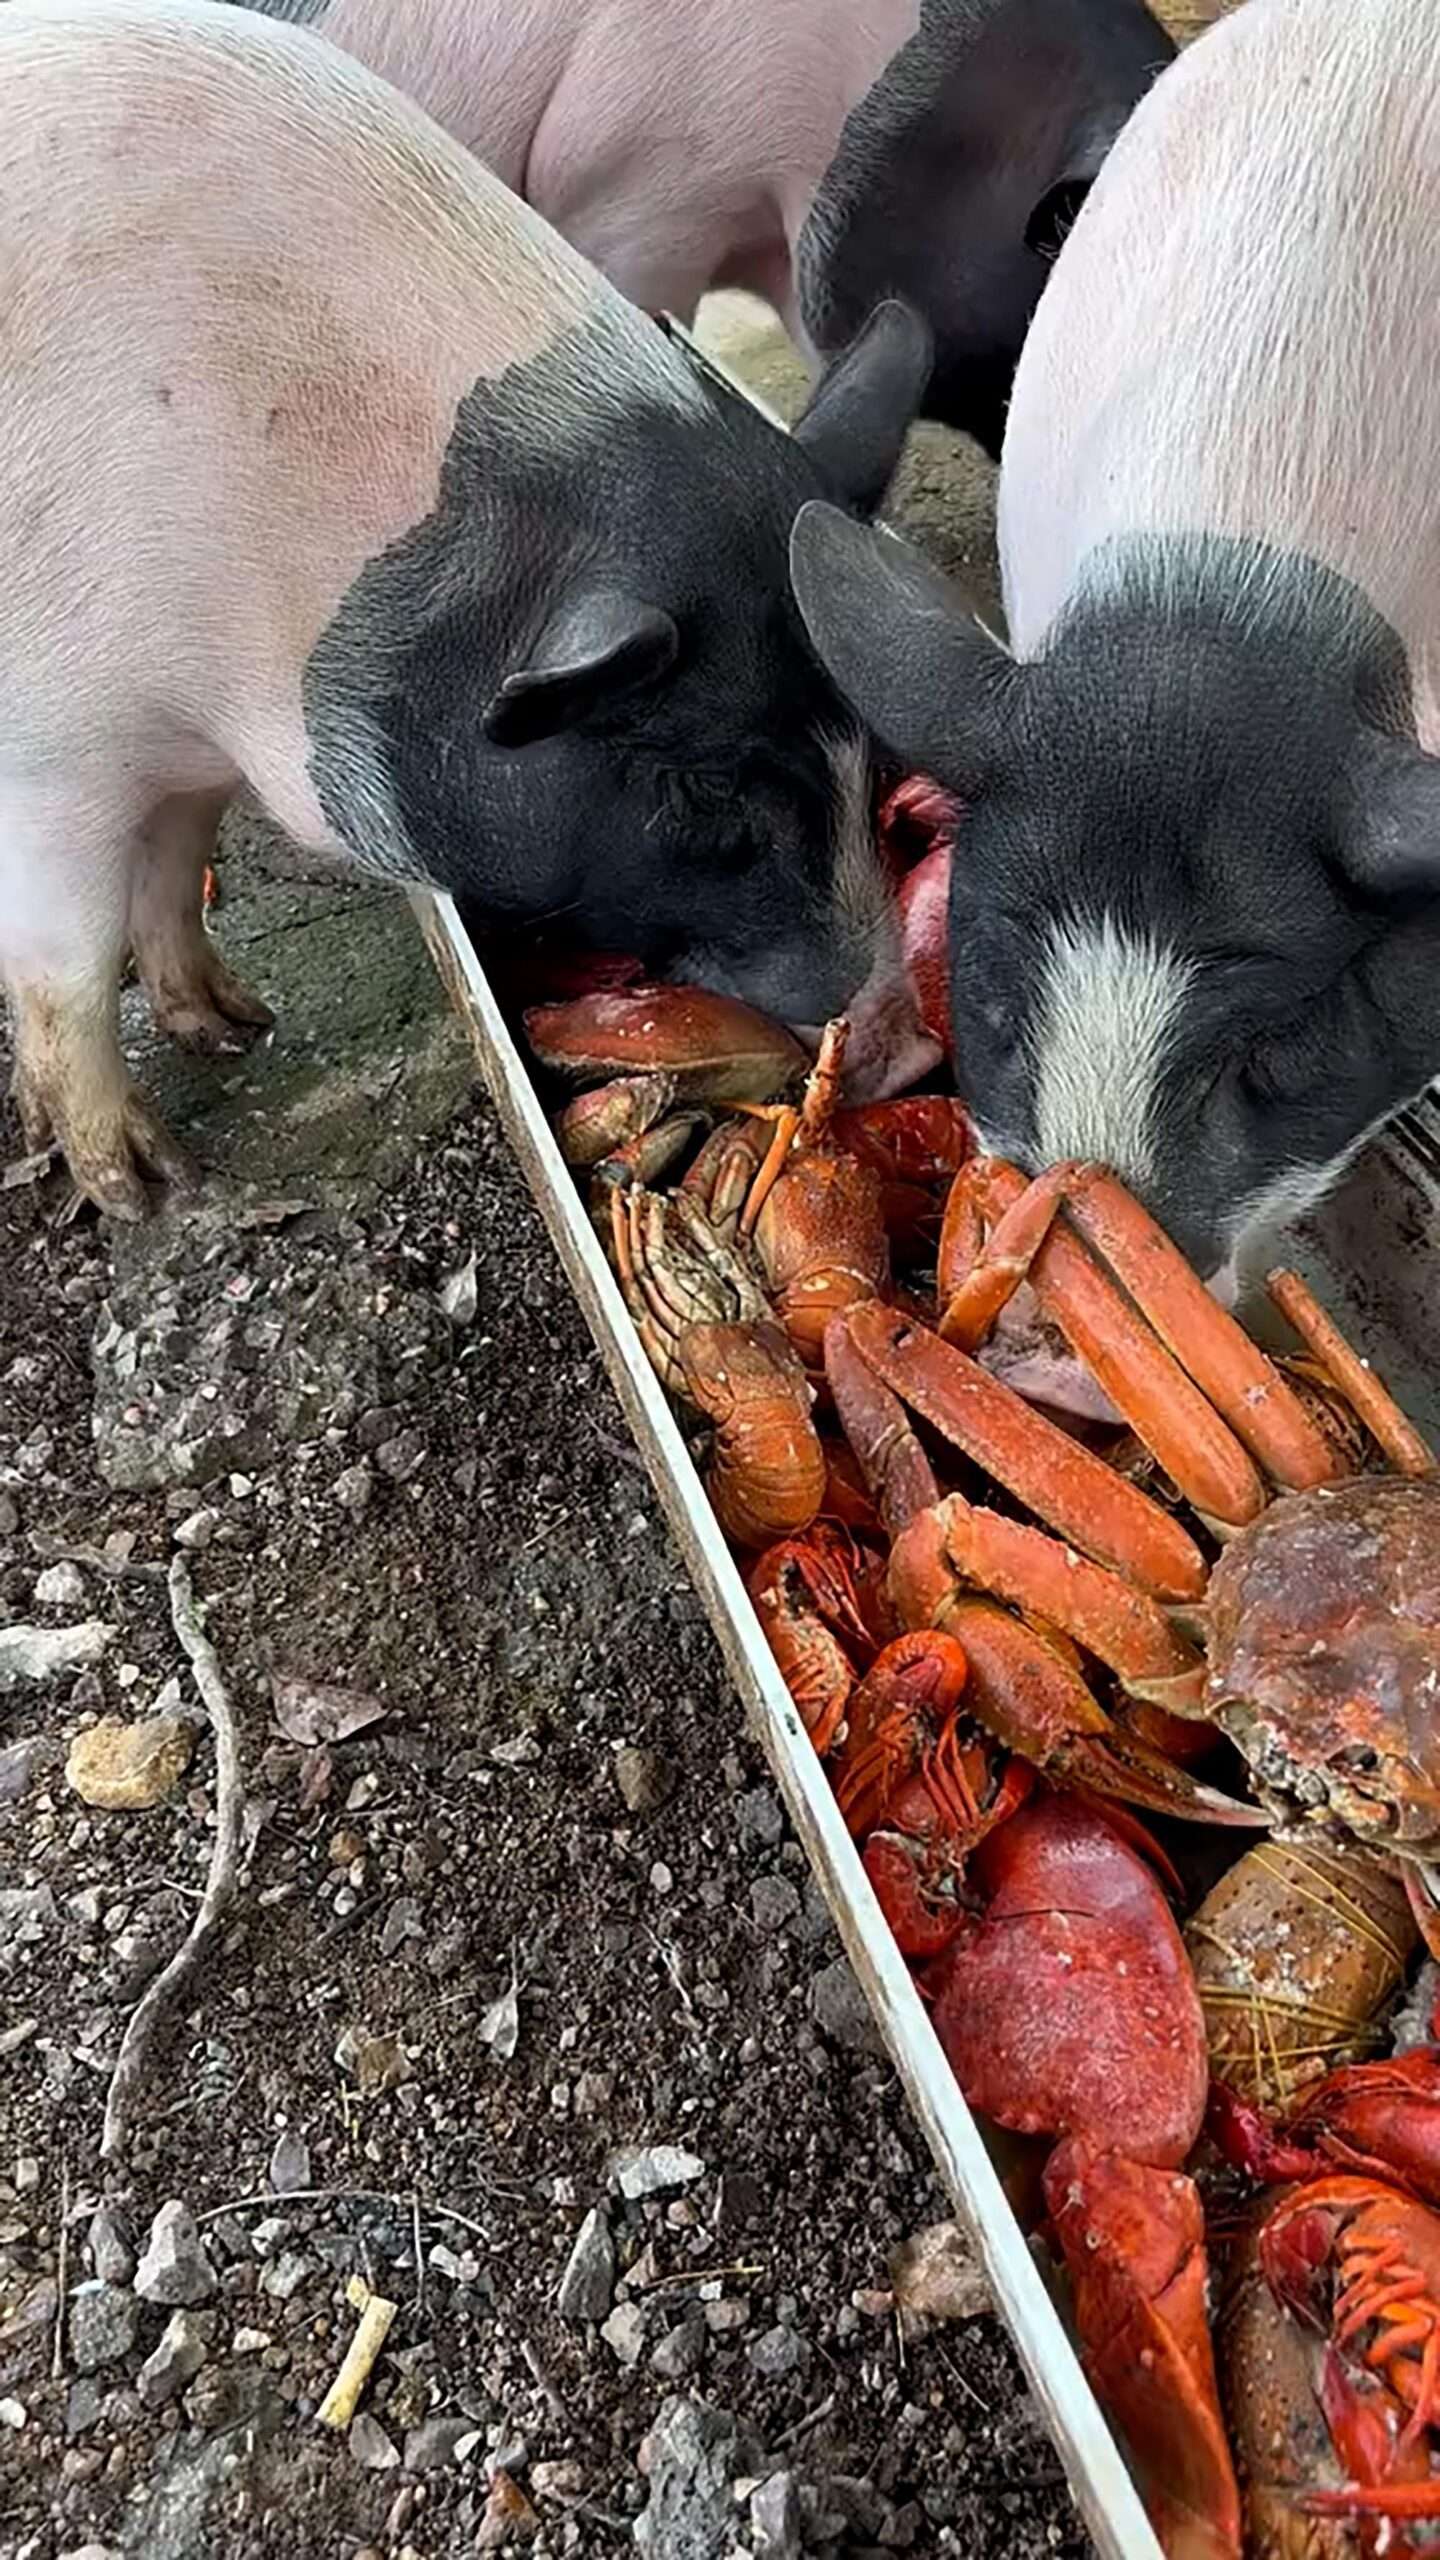 Read more about the article Coastal Farmer Raises Eyebrows With Fresh Lobster And Crab Diet For Pigs